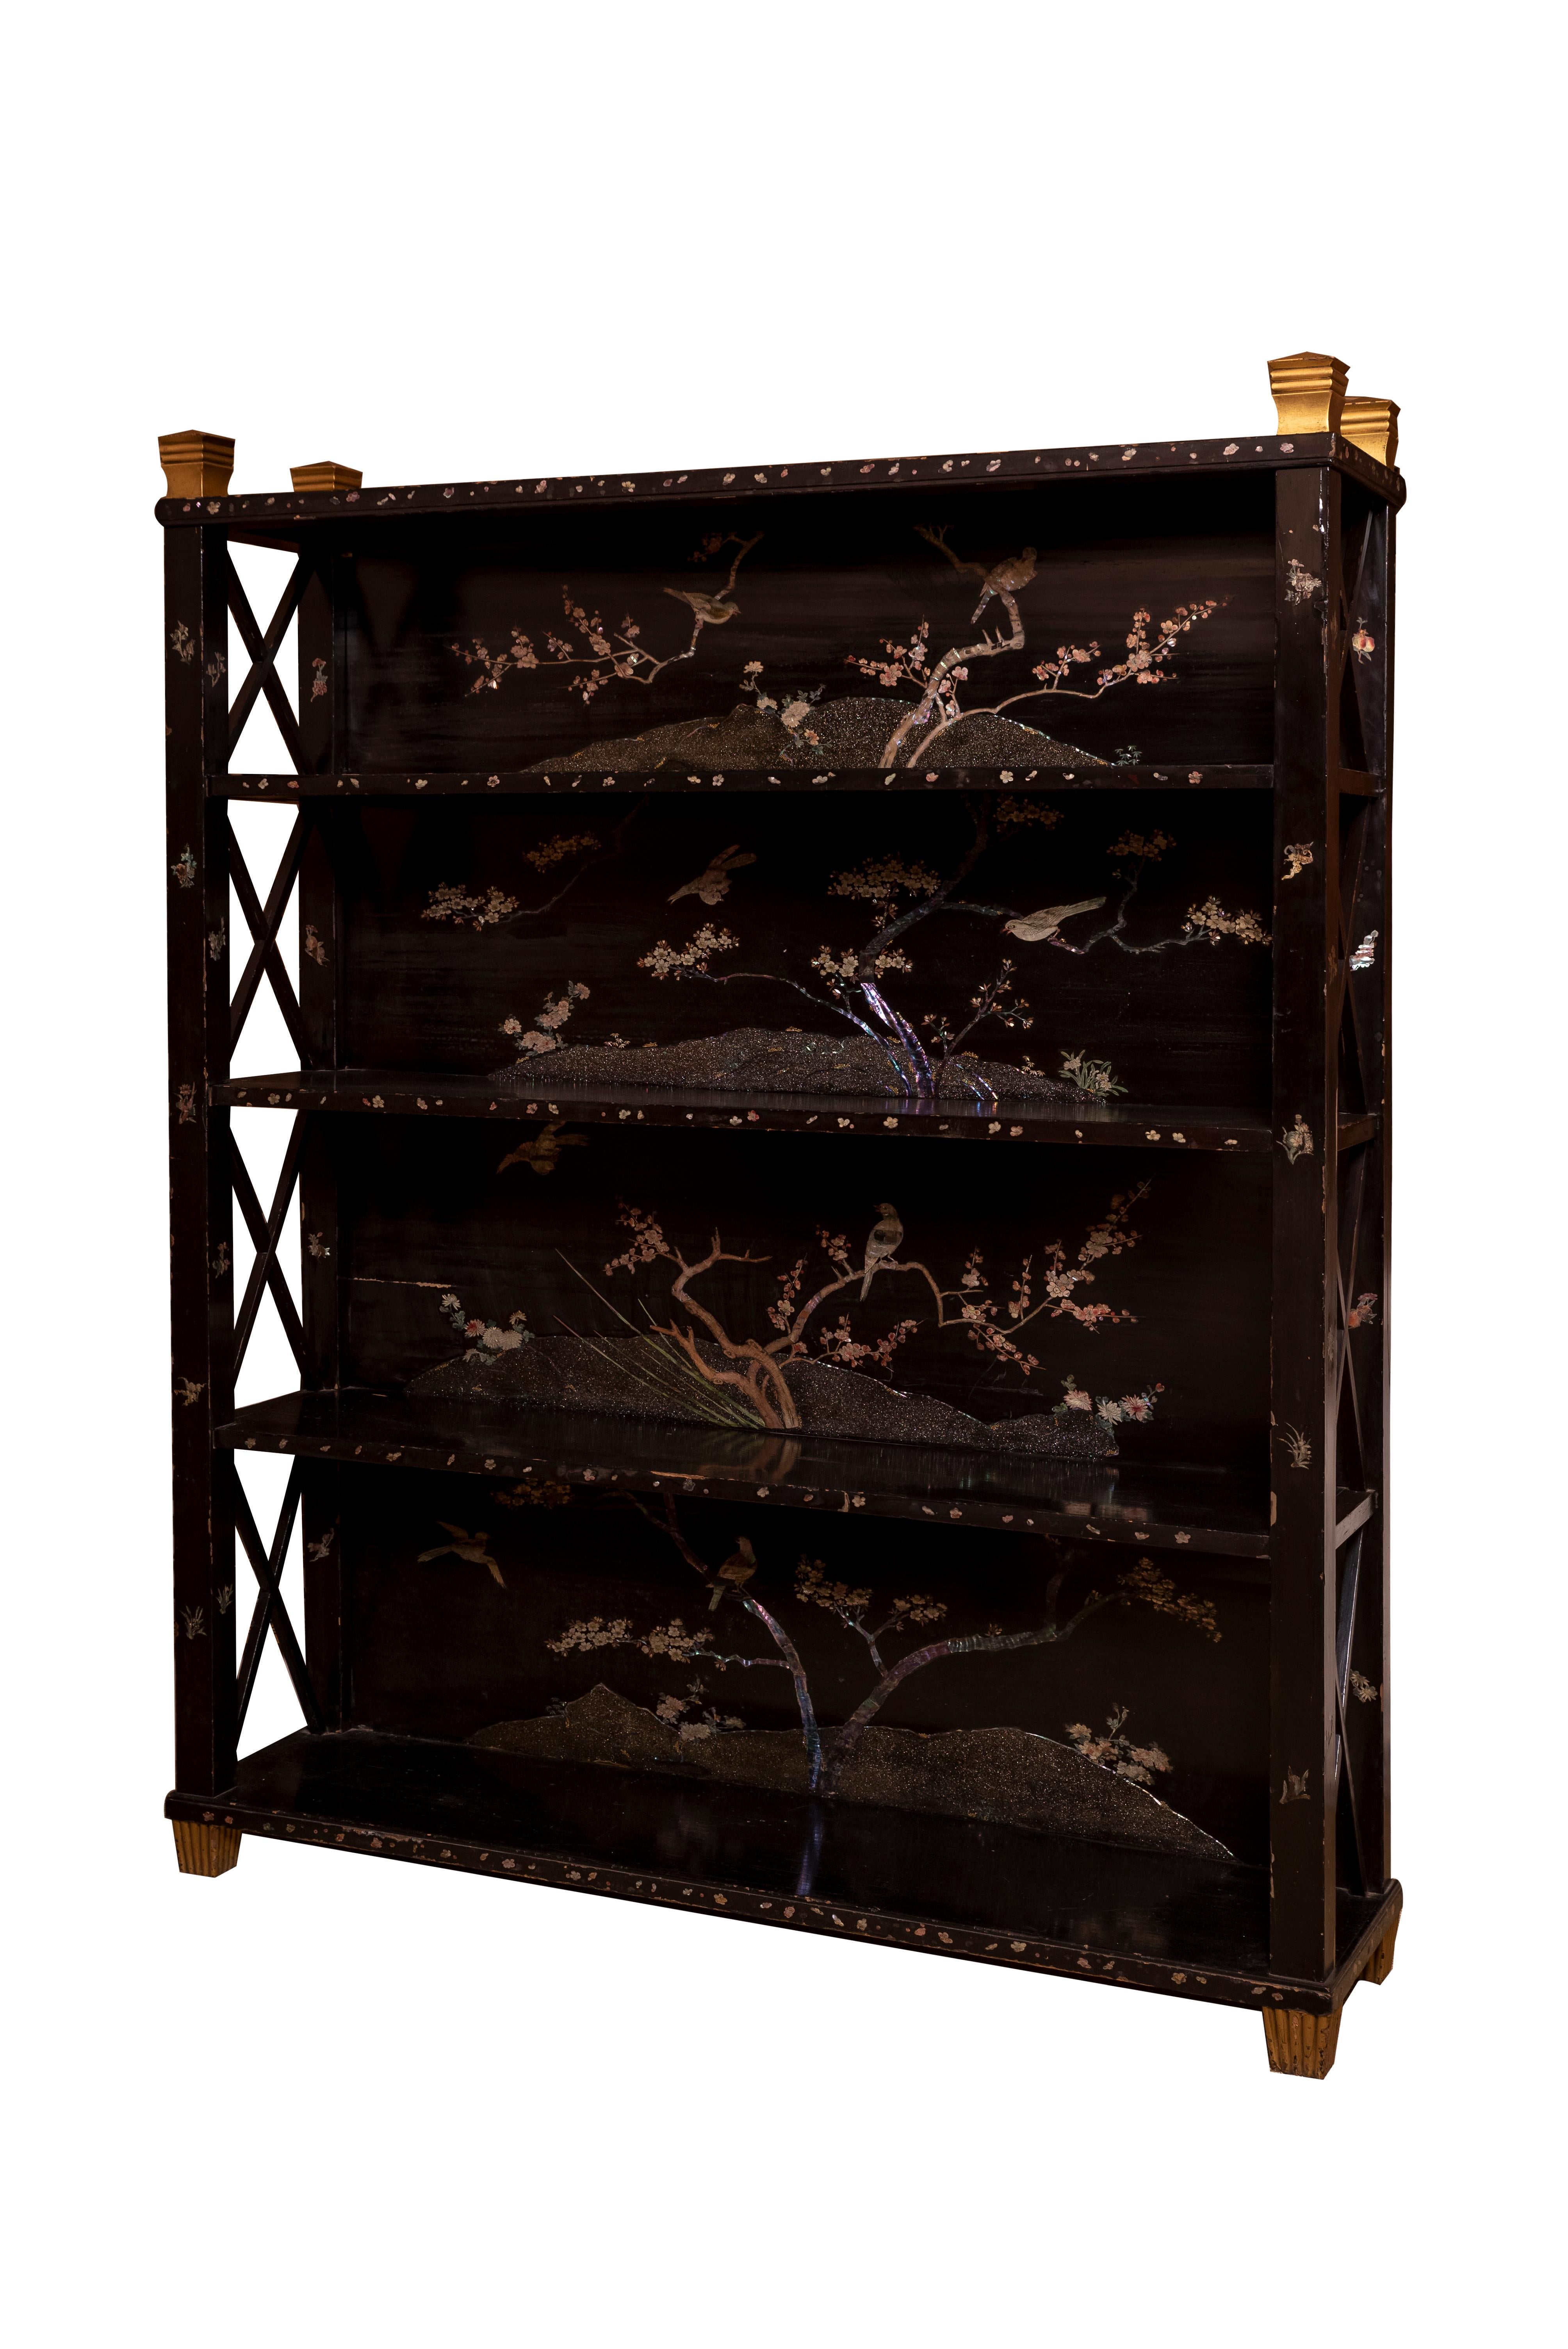 A 20th century british chippendale style black lacquered bookcase.
With 19th century mother of pearl pannels depicting birds and floral motives.